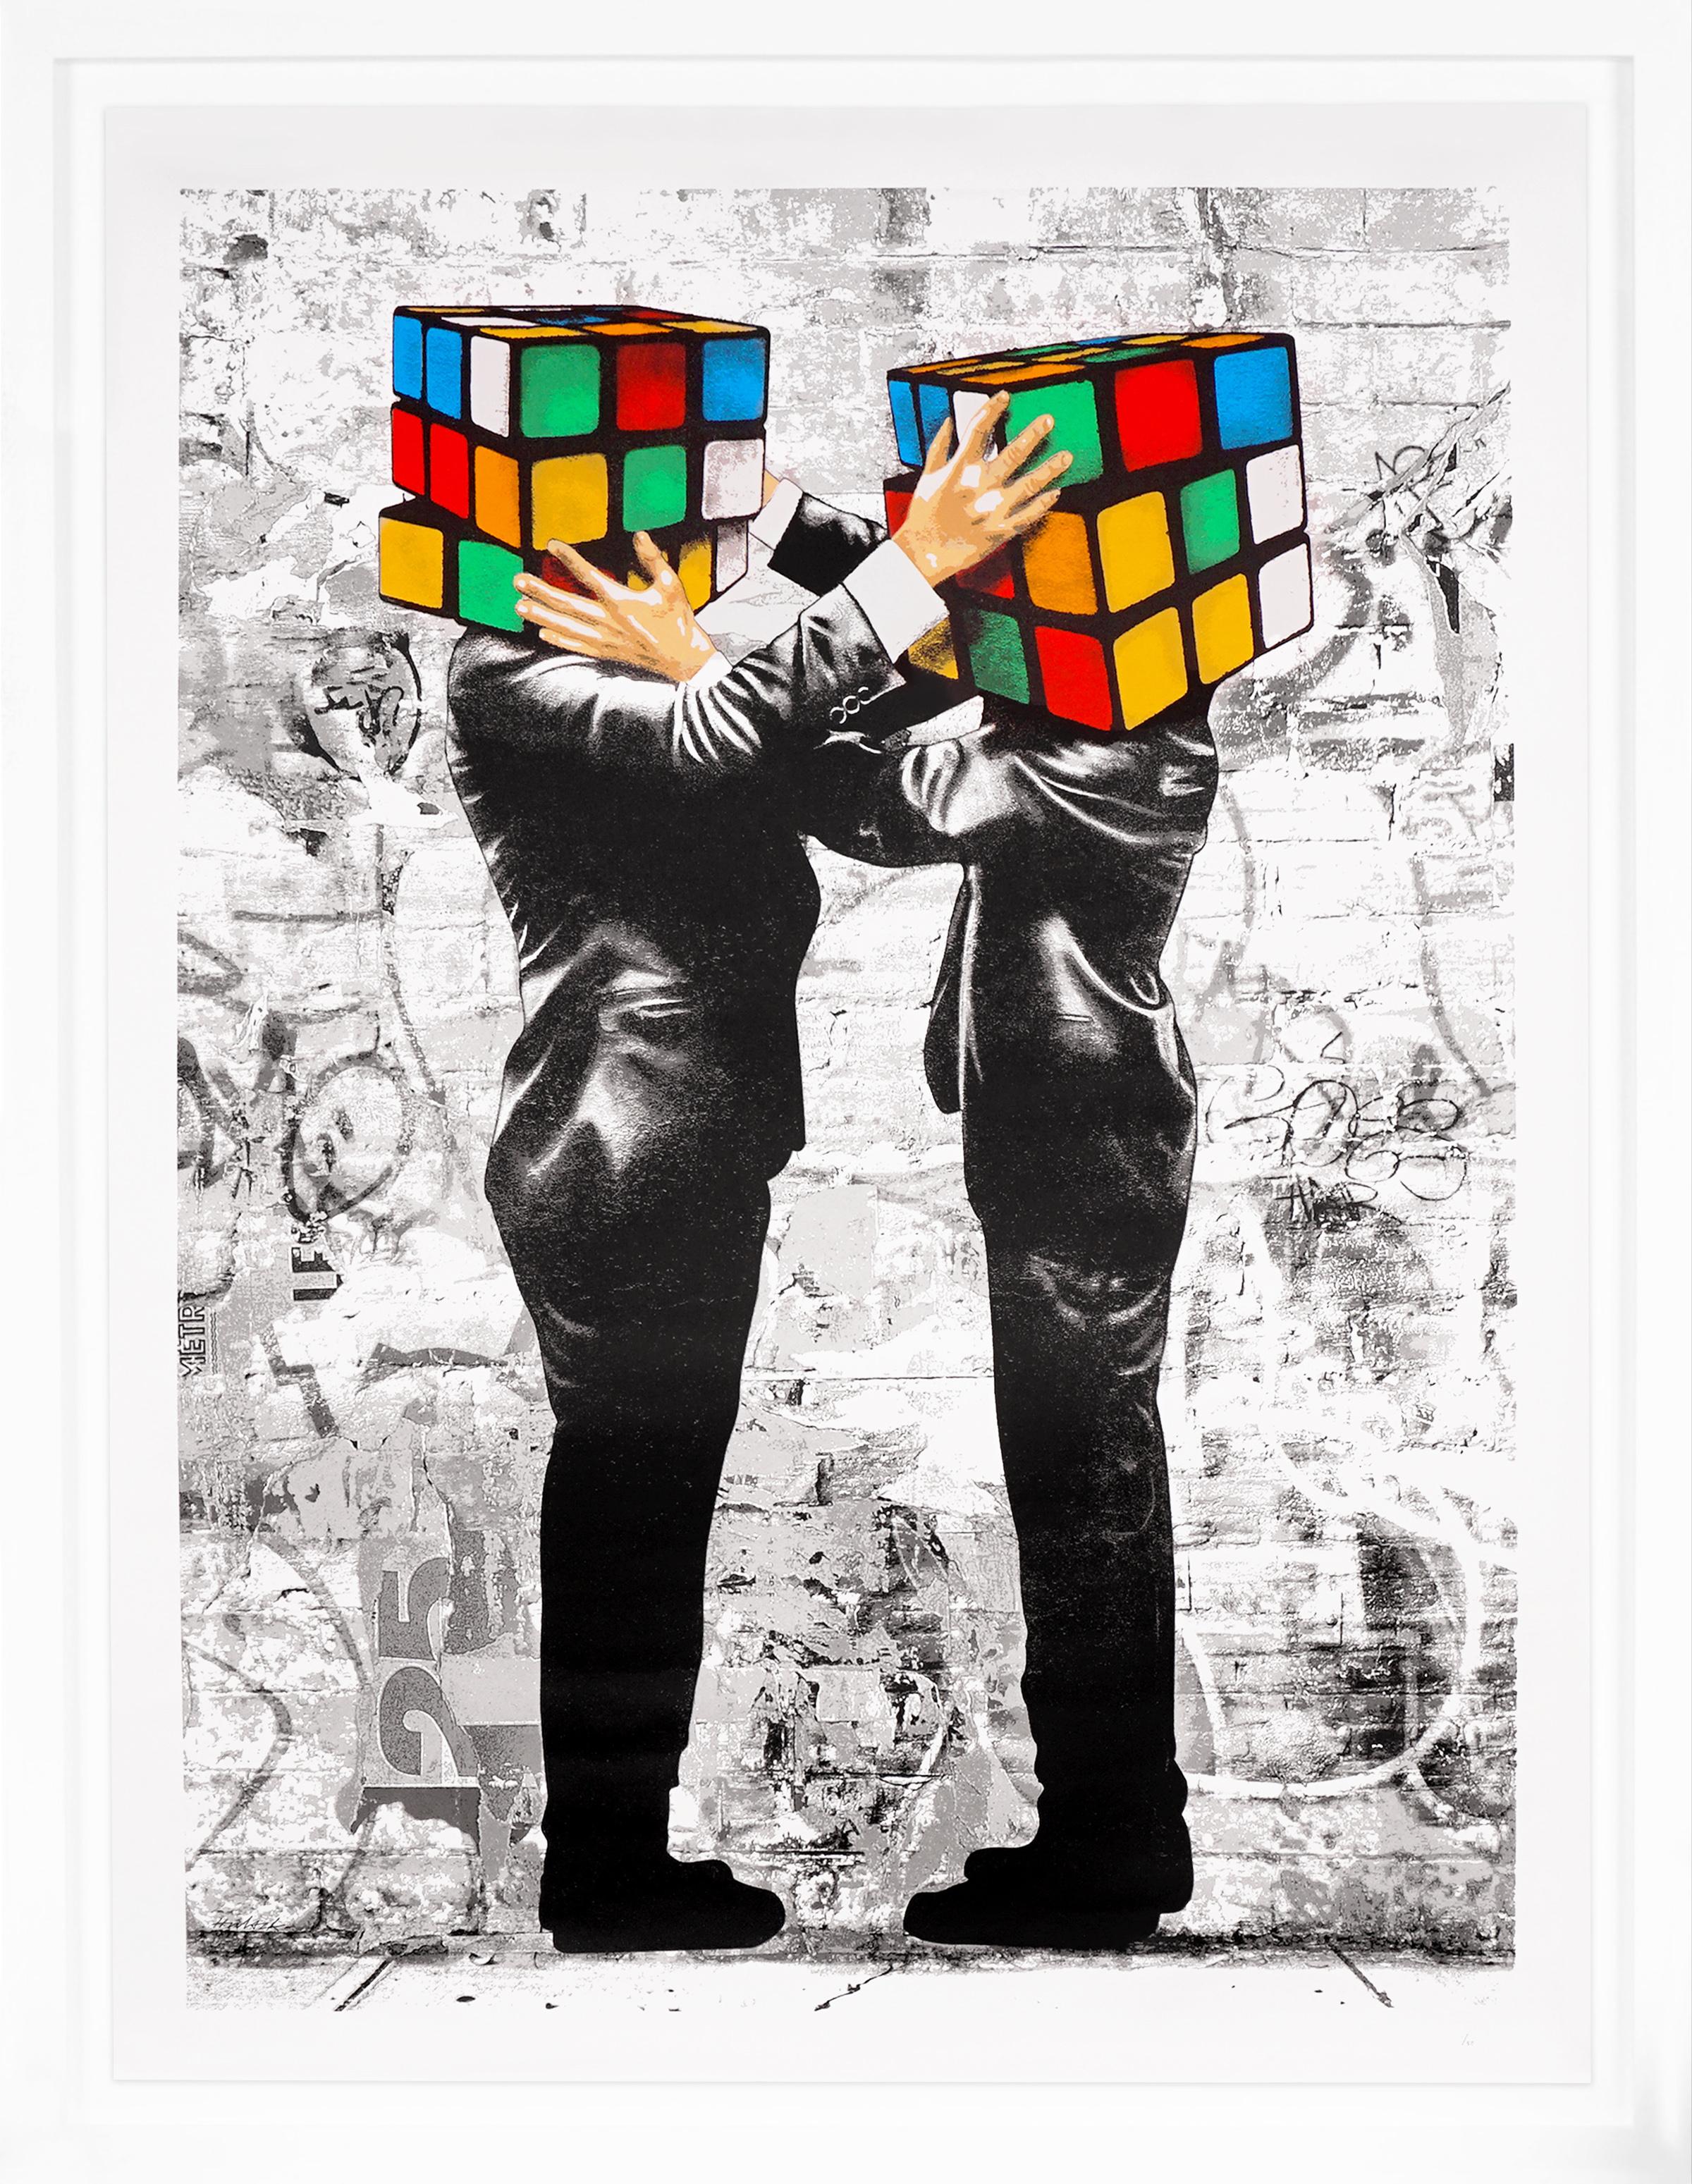 'Puzzled,' by contemporary prodigy Hijack, reflects the seemingly insurmountable political and cultural divide in today’s society. Hijack has commented that this iconic print is also a message that can apply to most human relationships in life.